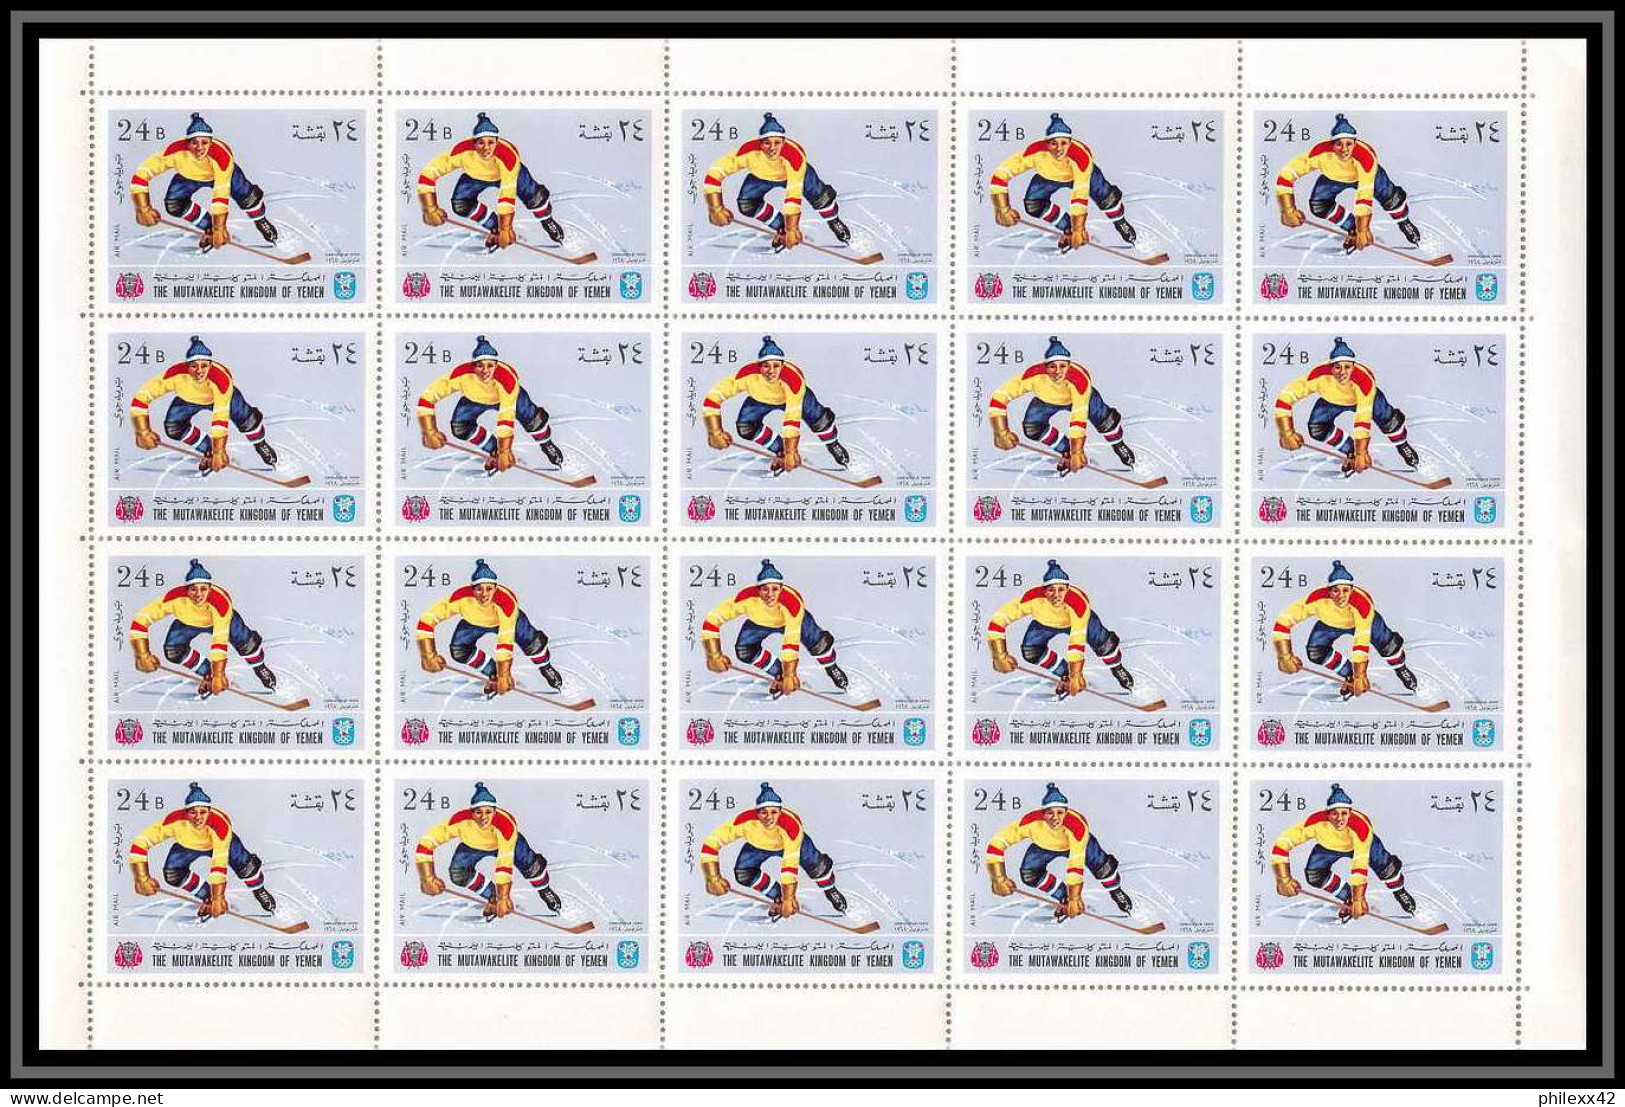 134b - Yemen royaume MNH ** Mi N° 454 / 463 A jeux olympiques (winter olympic games) grenoble 1968 feuilles (sheets)